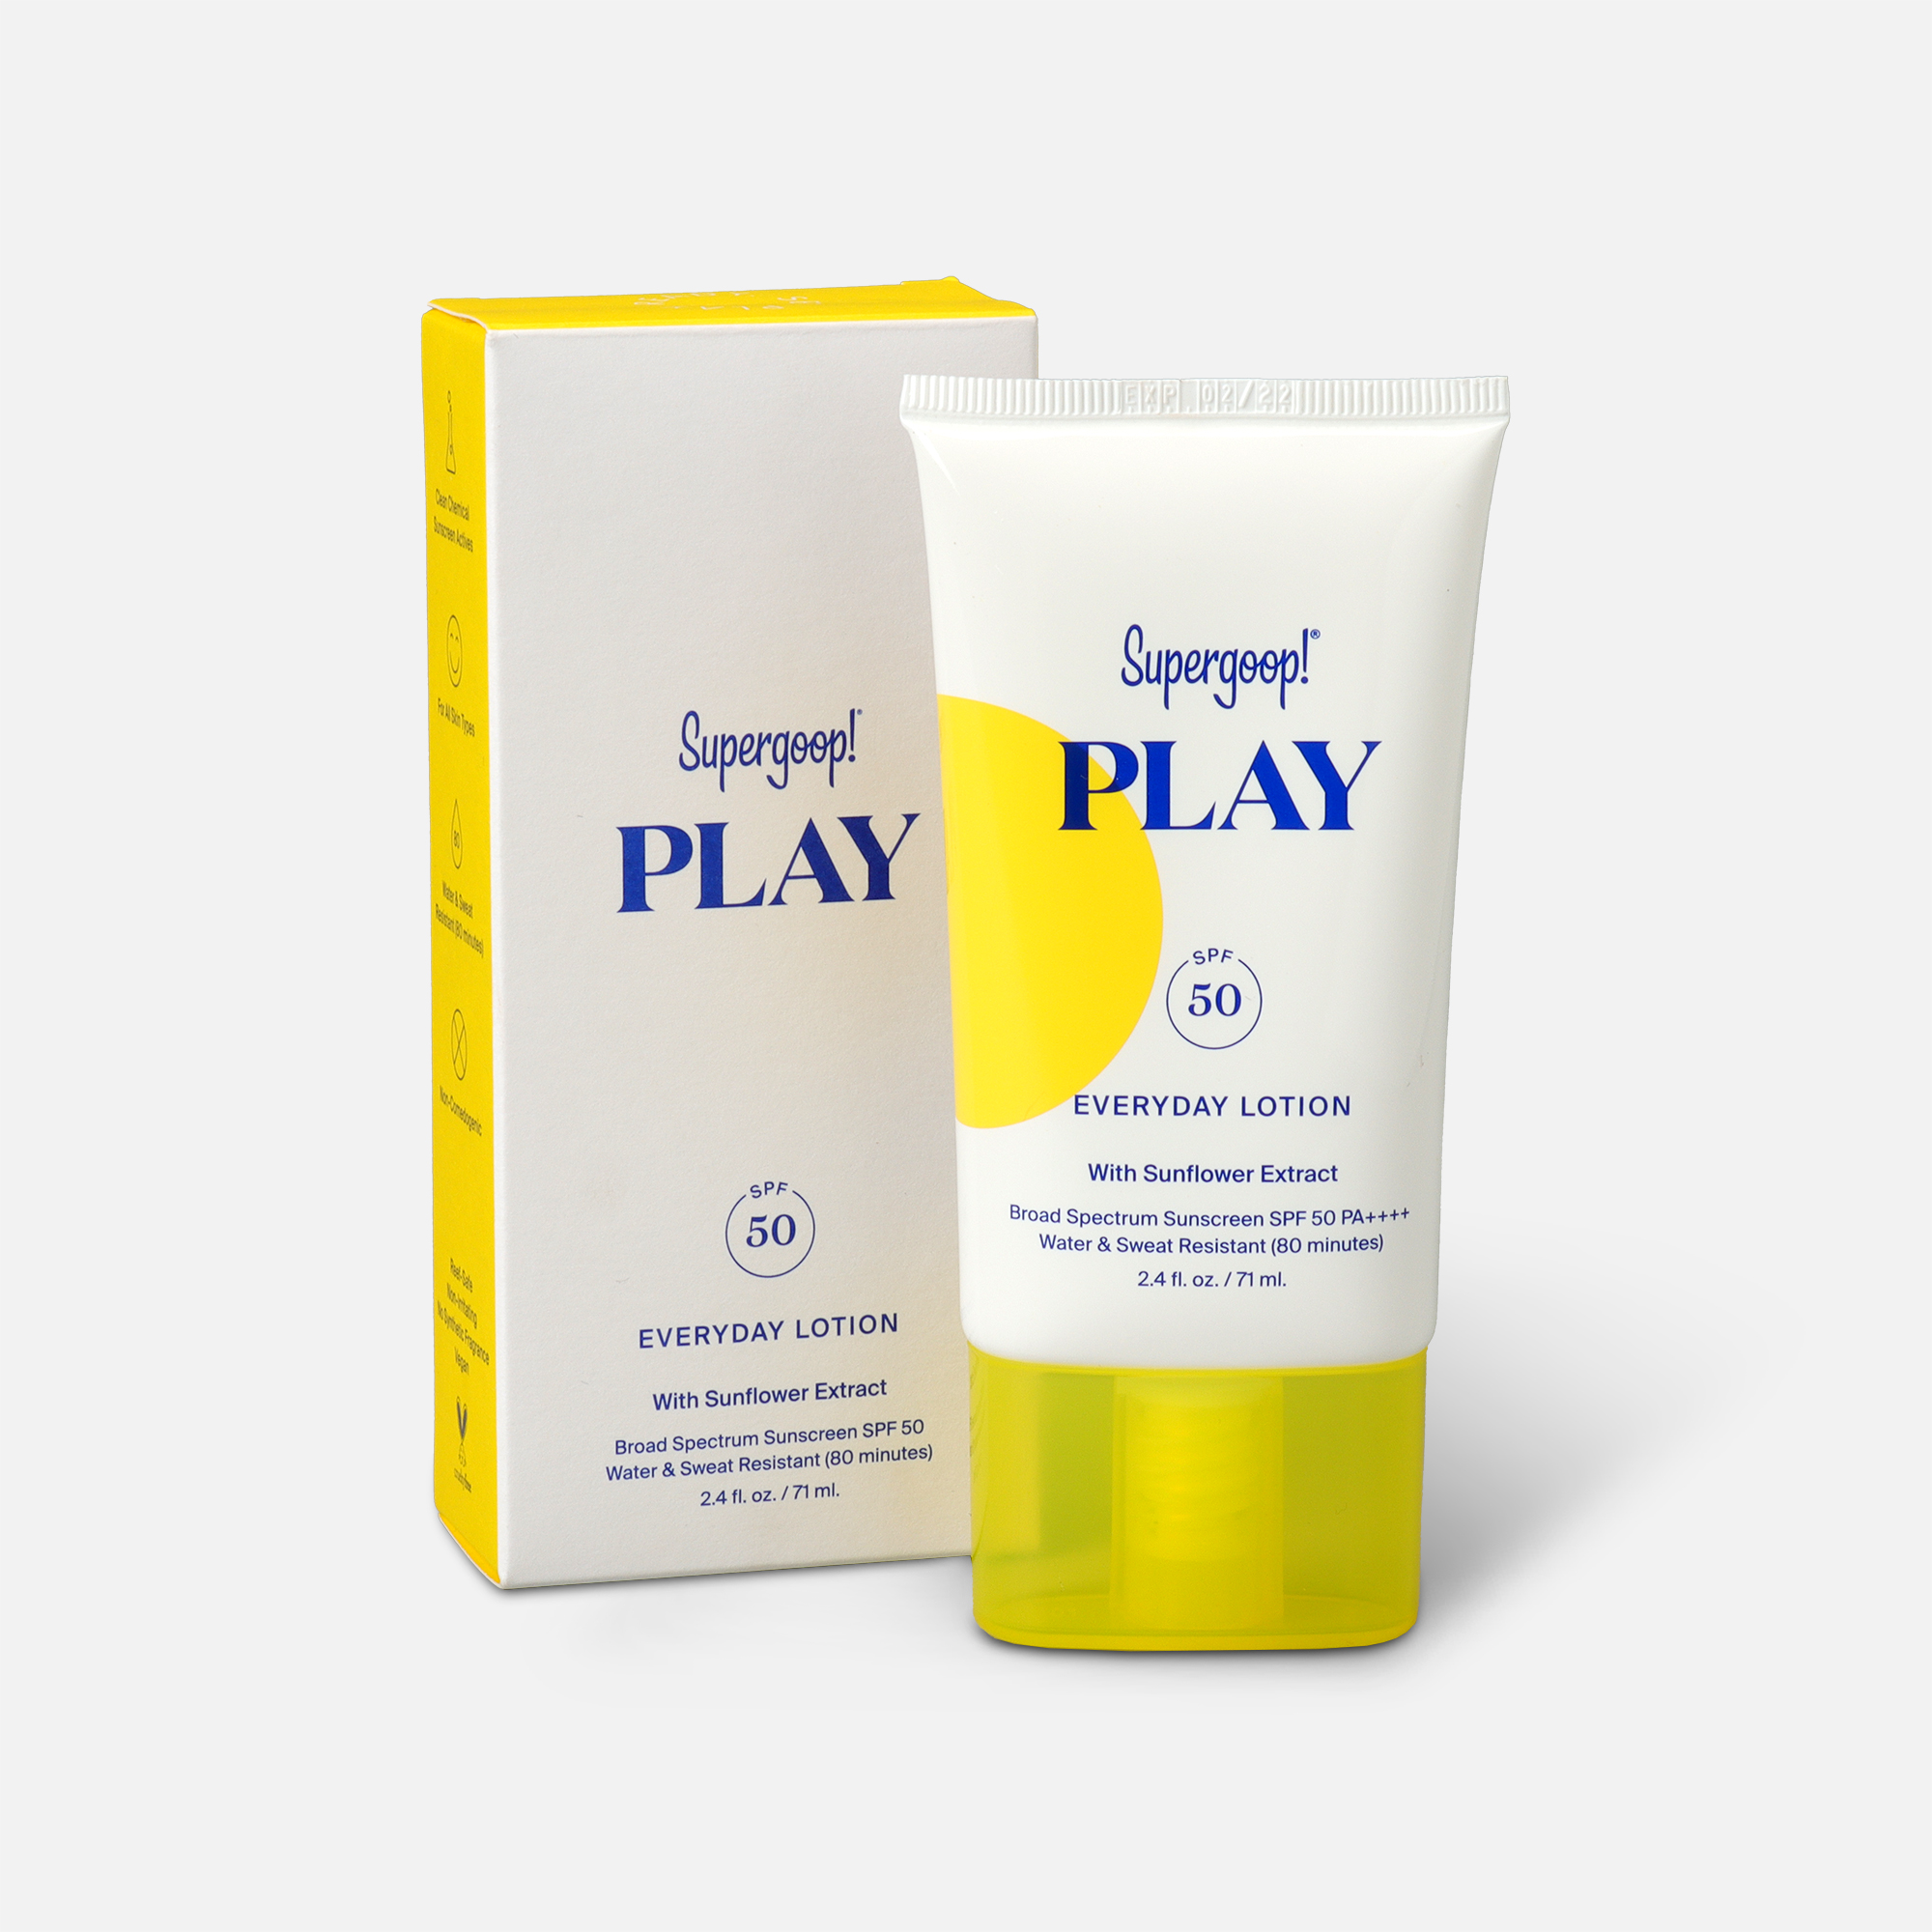 Supergoop! PLAY Everyday Lotion SPF 50 with Sunflower Extract